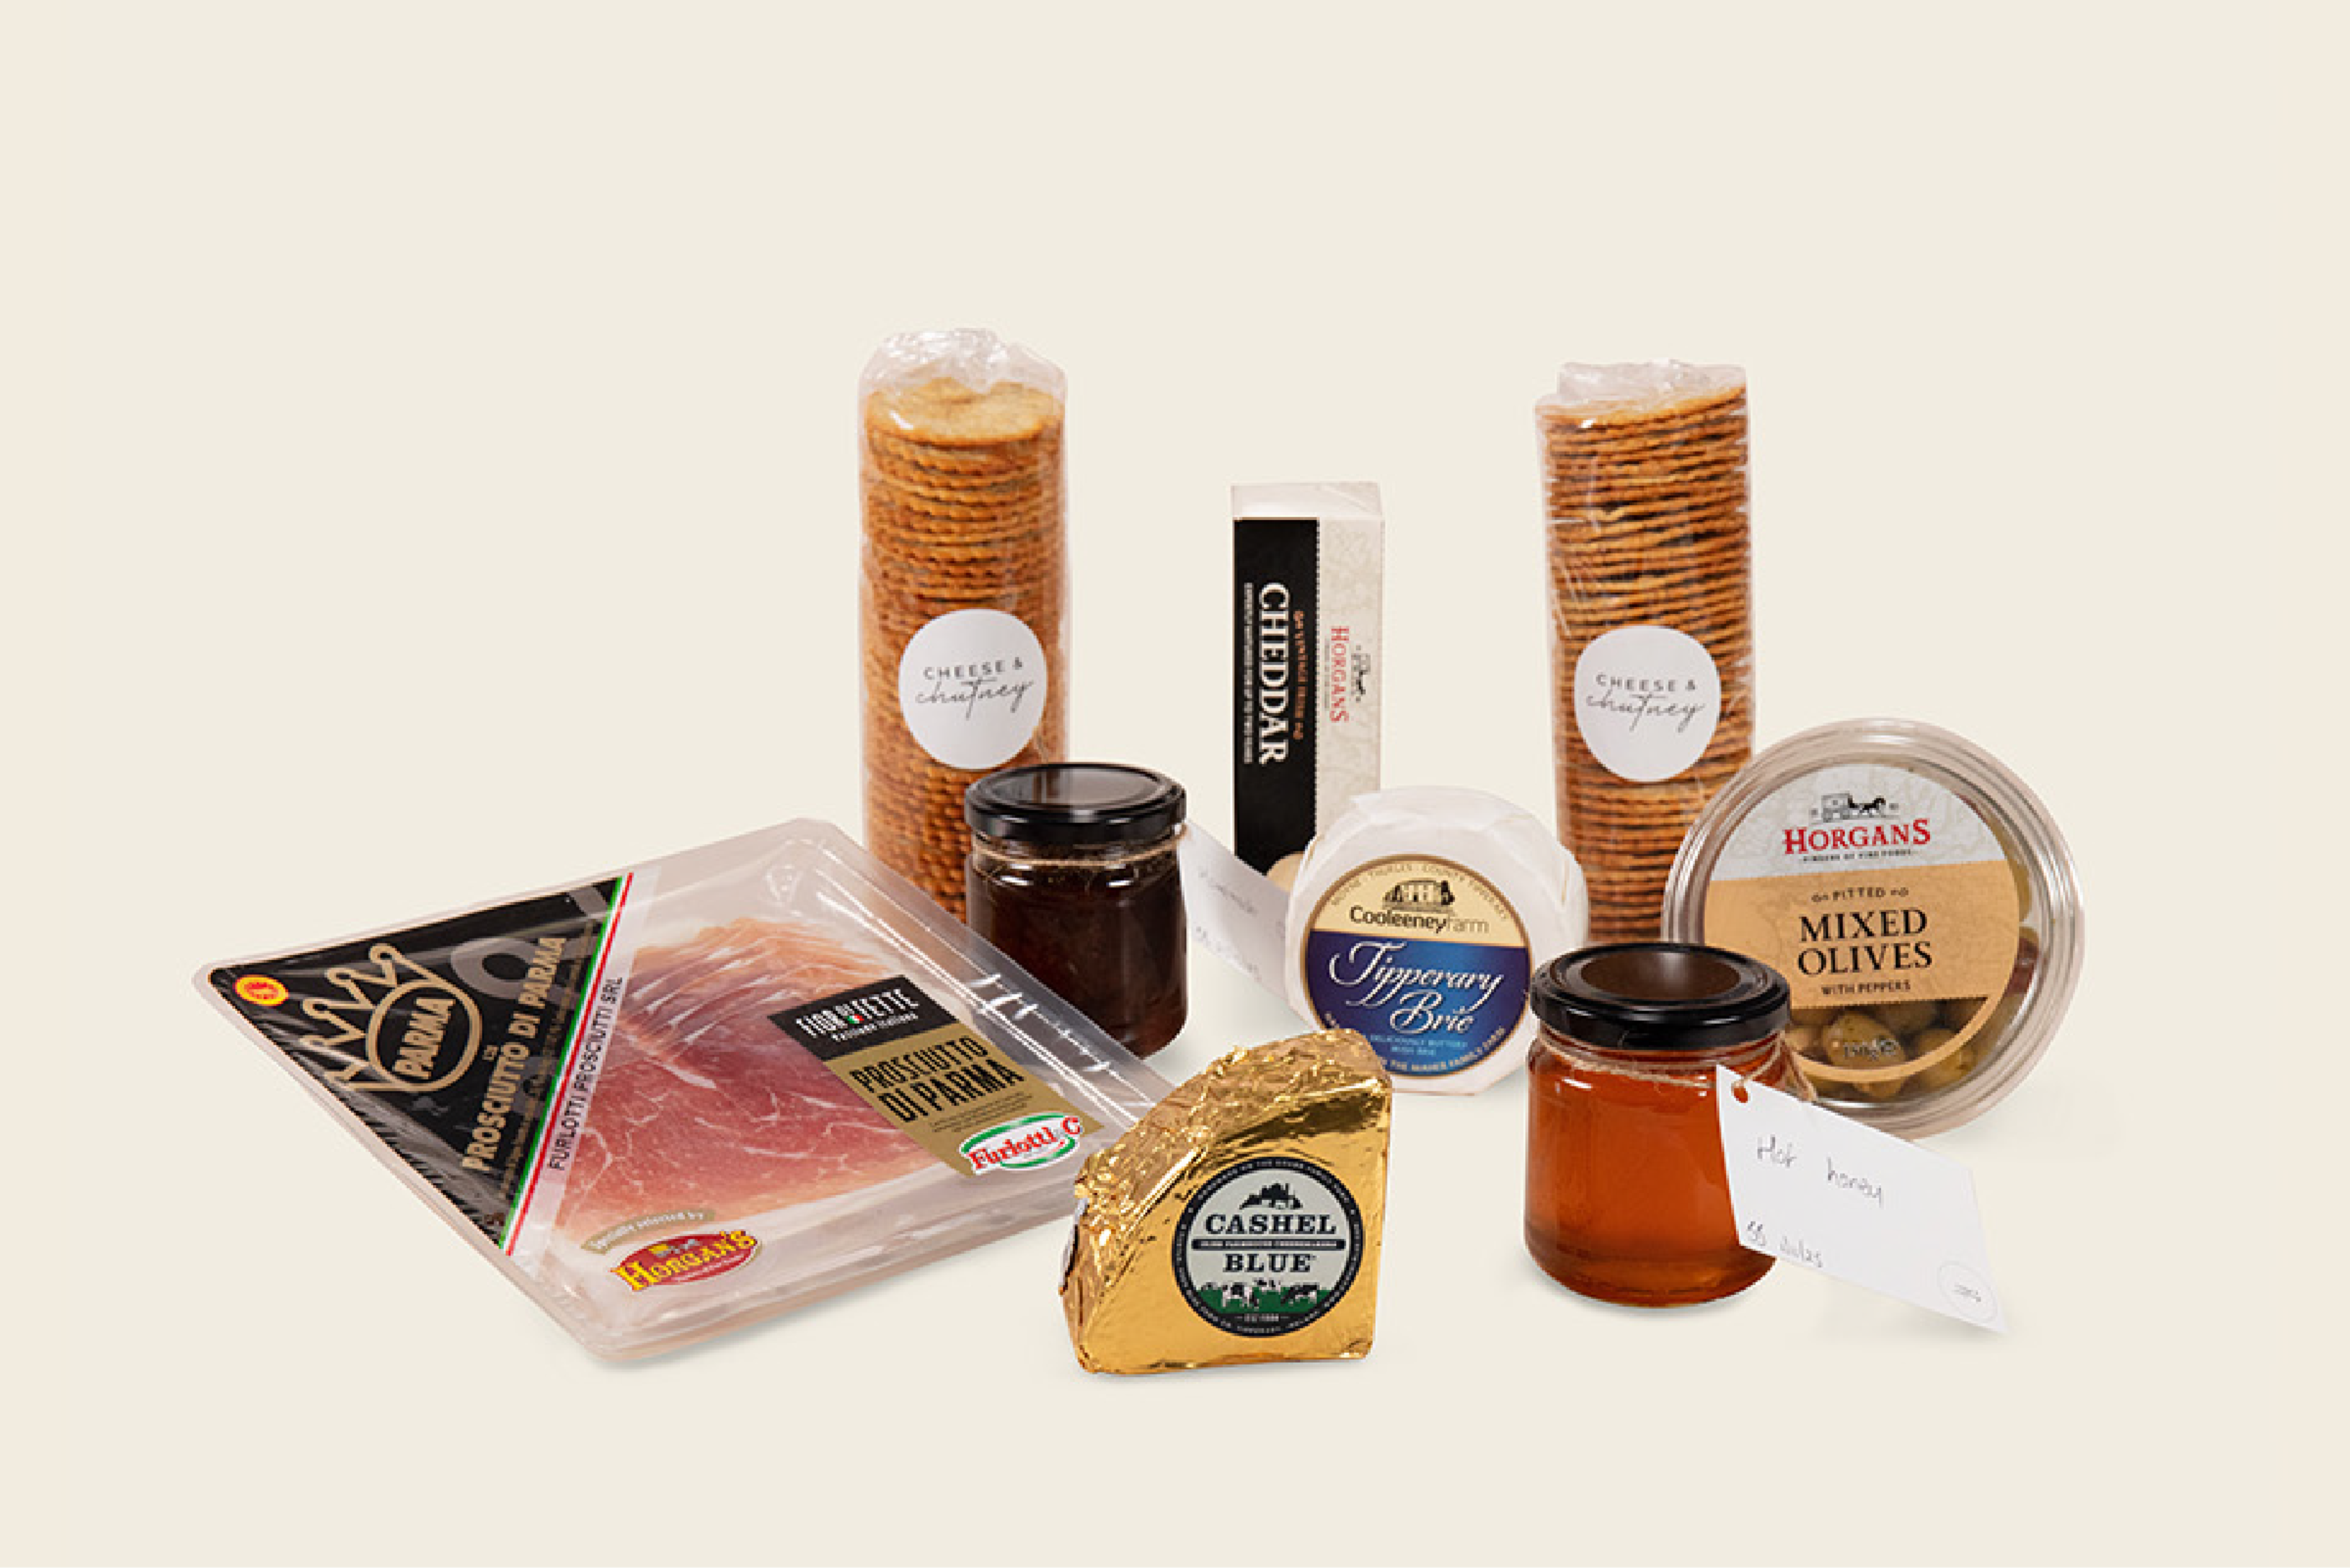 The Ultimate Cheese Hamper by Cheese and Chutney